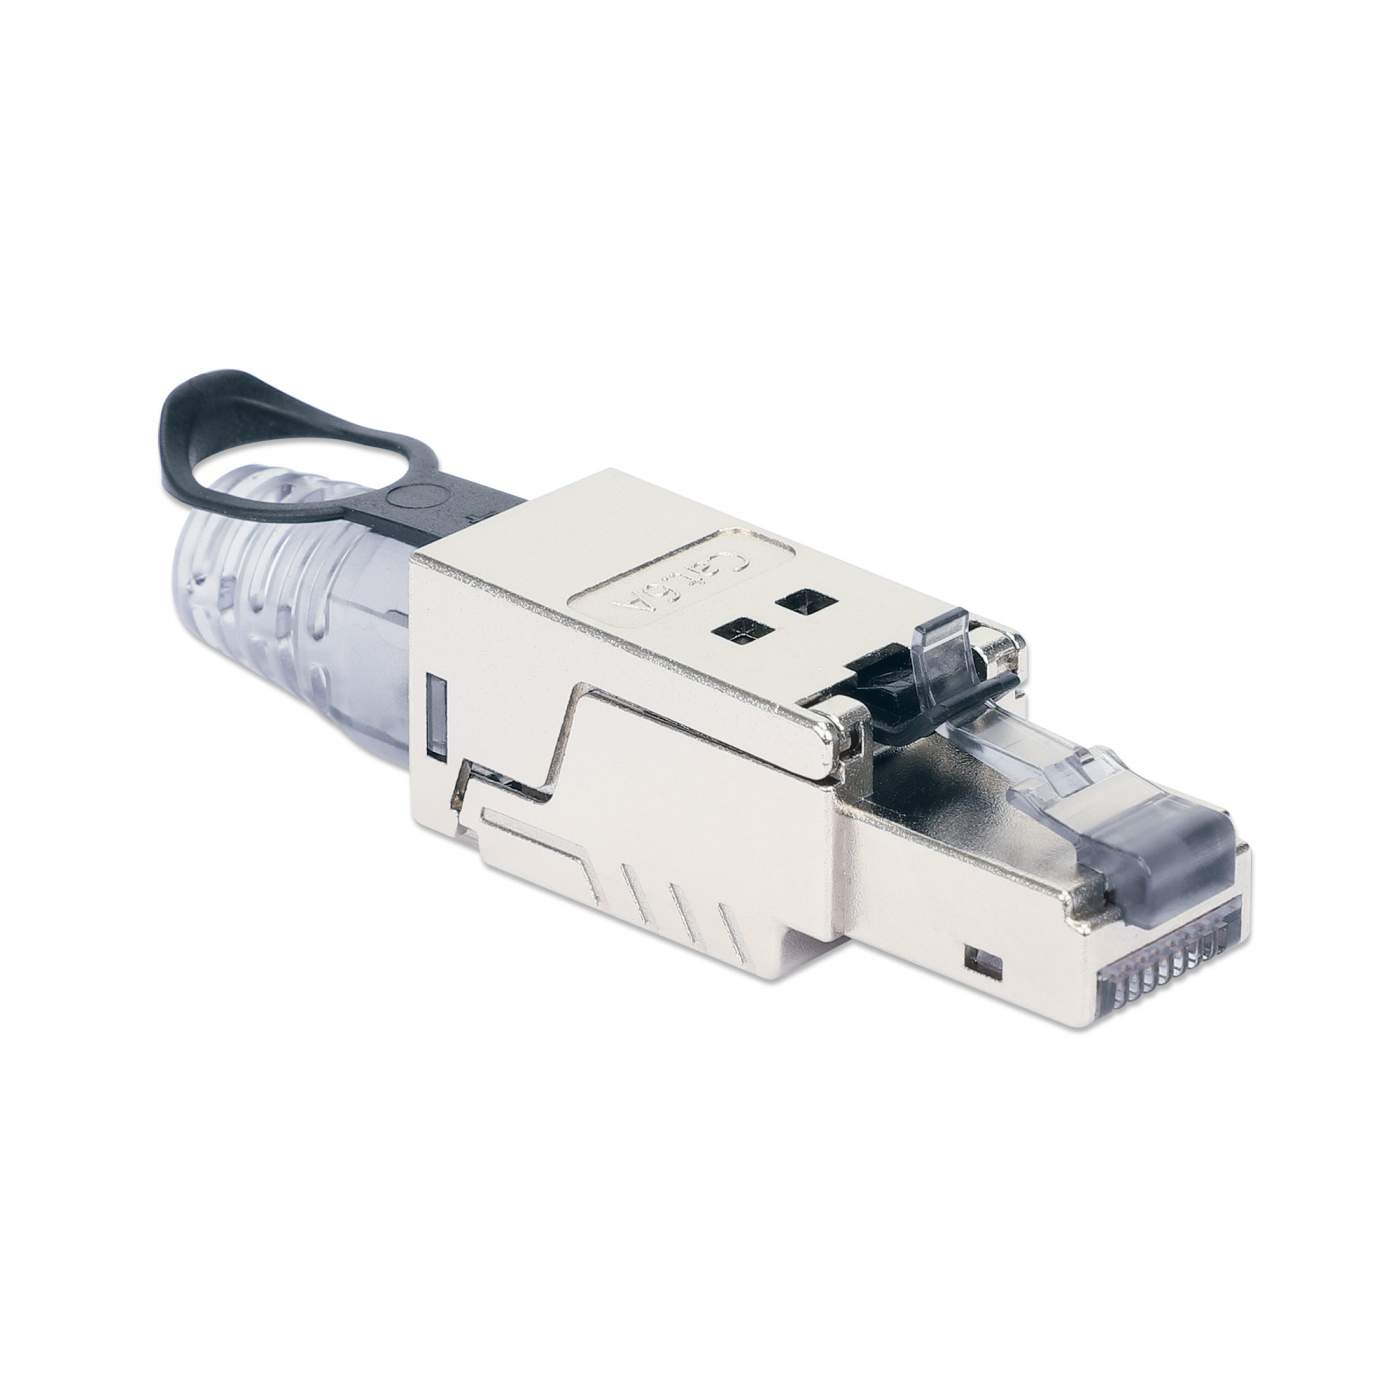 Field terminated, toolless RJ45 s connector for Cat.7A, Cat.7, Cat